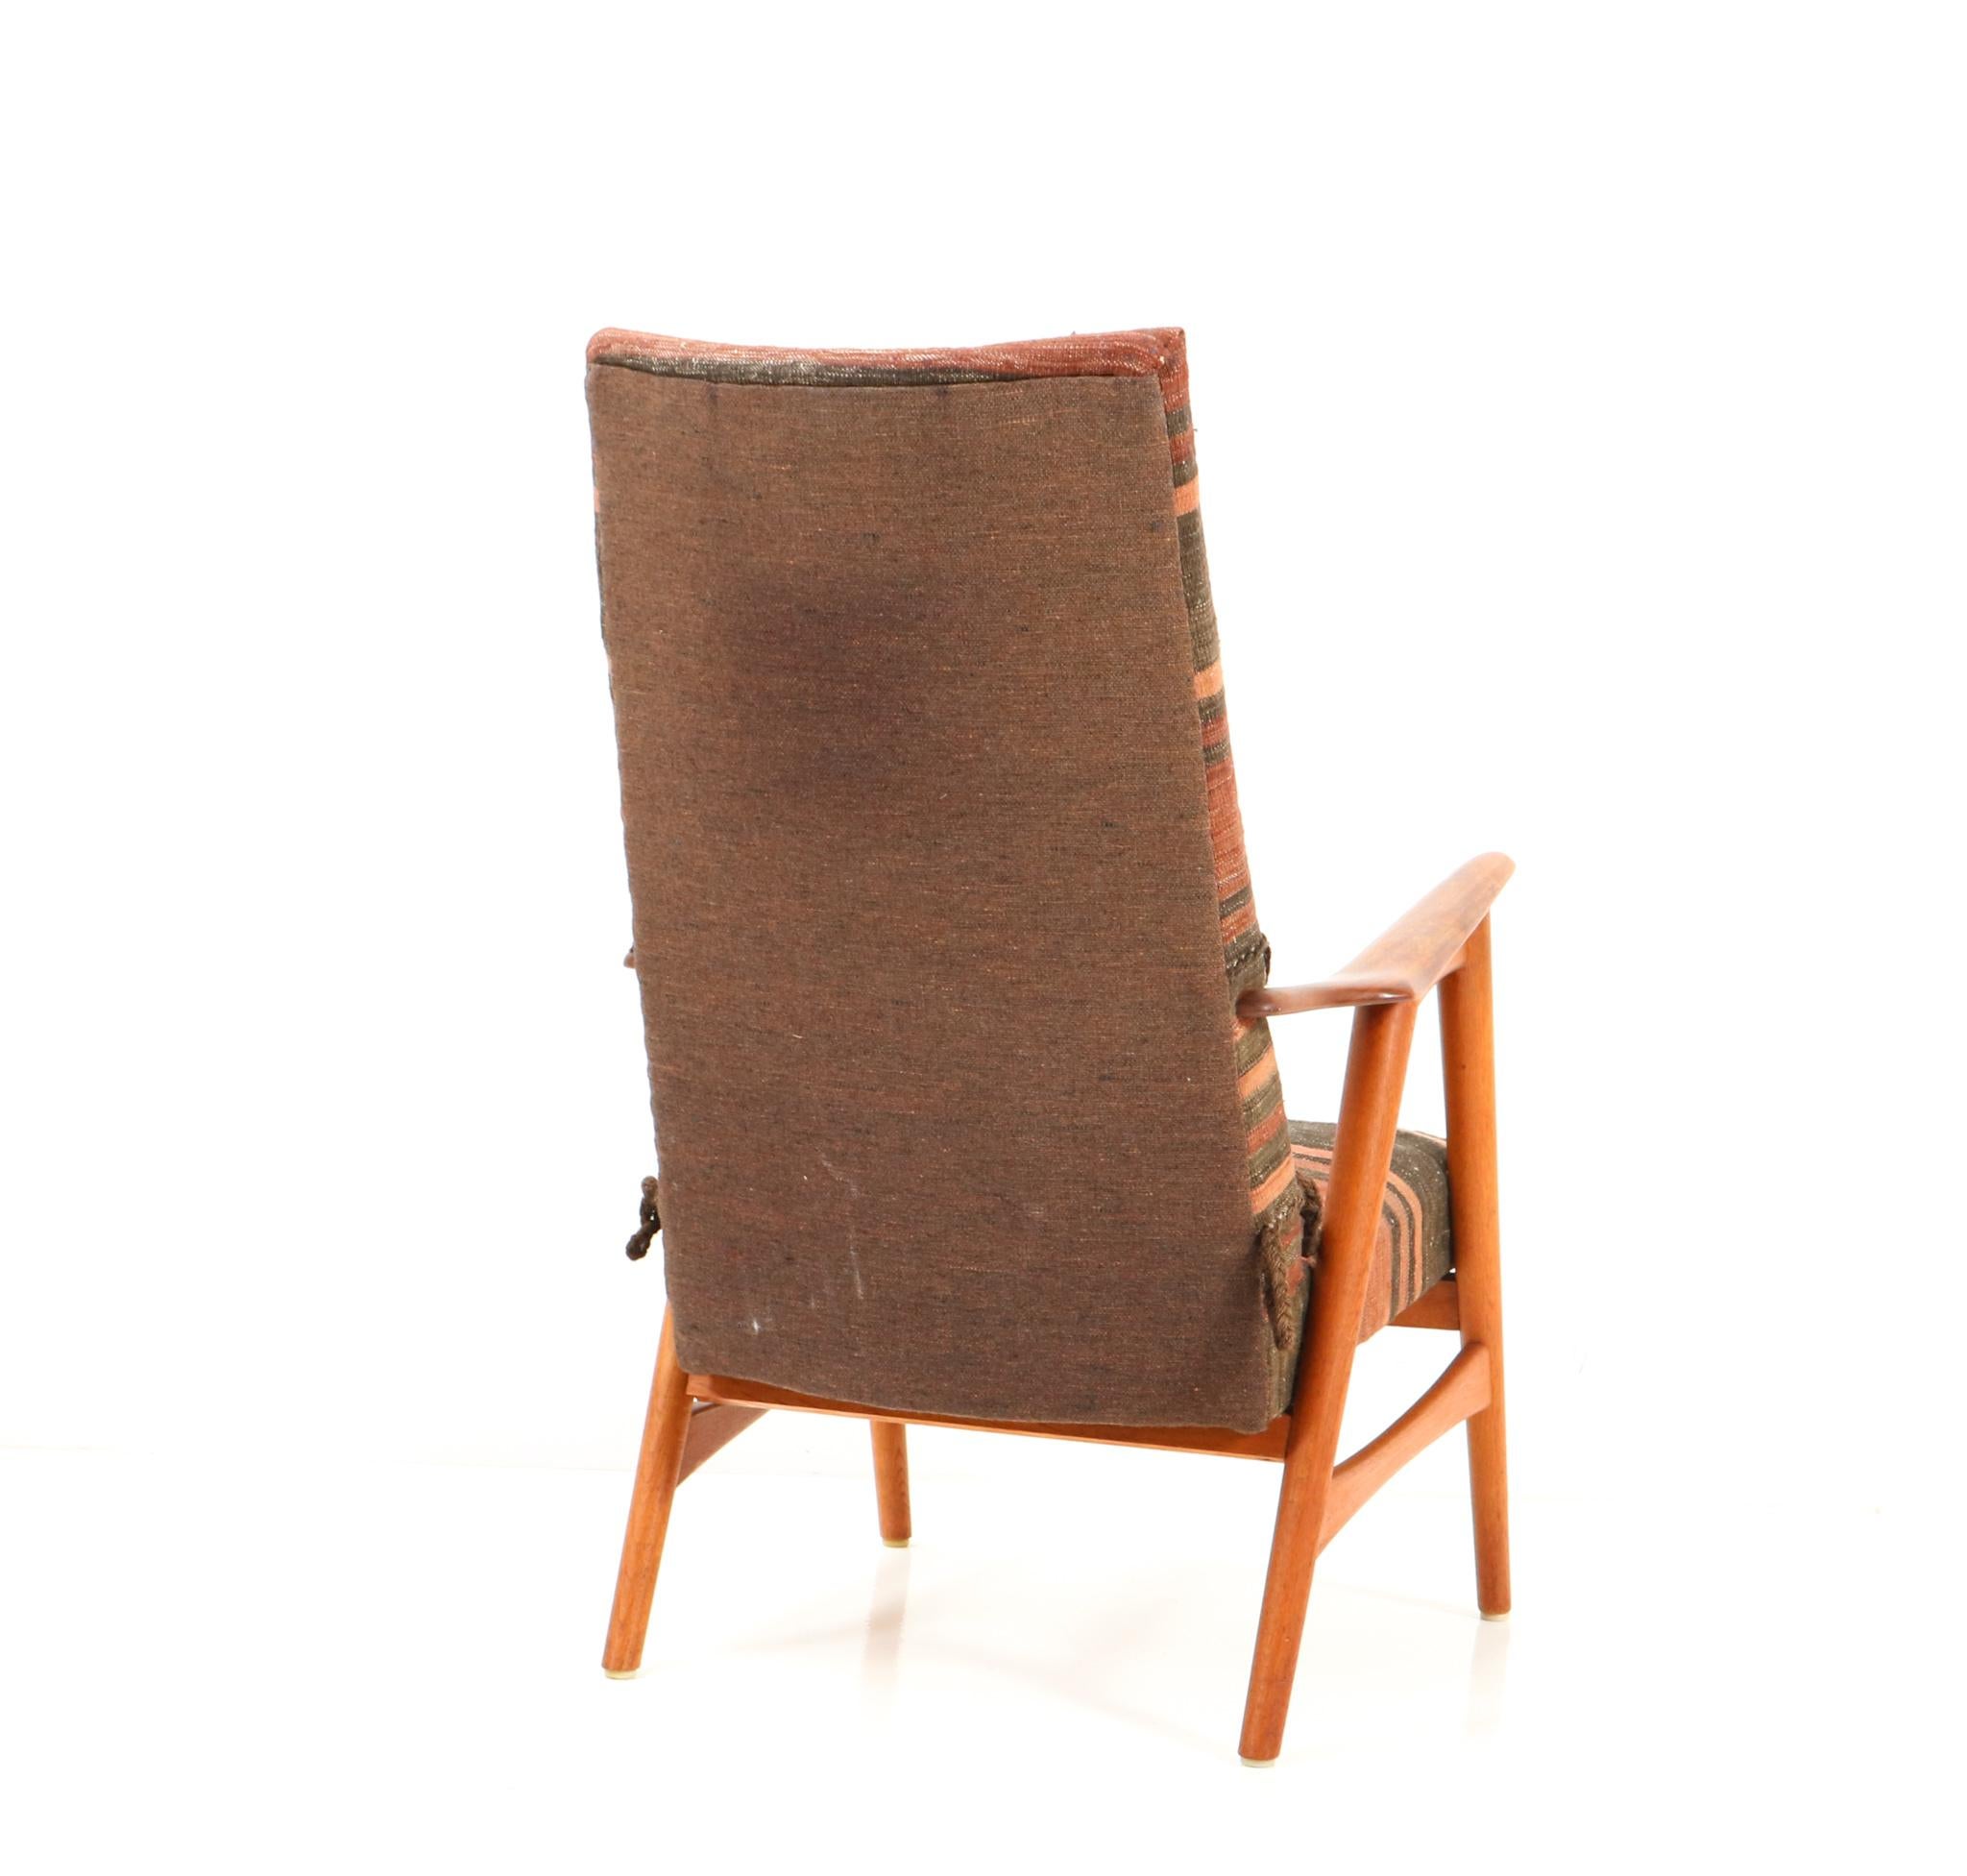 Mid-20th Century Teak Mid-Century Modern Lounge Chair with Kilim Upholstery, 1960s For Sale